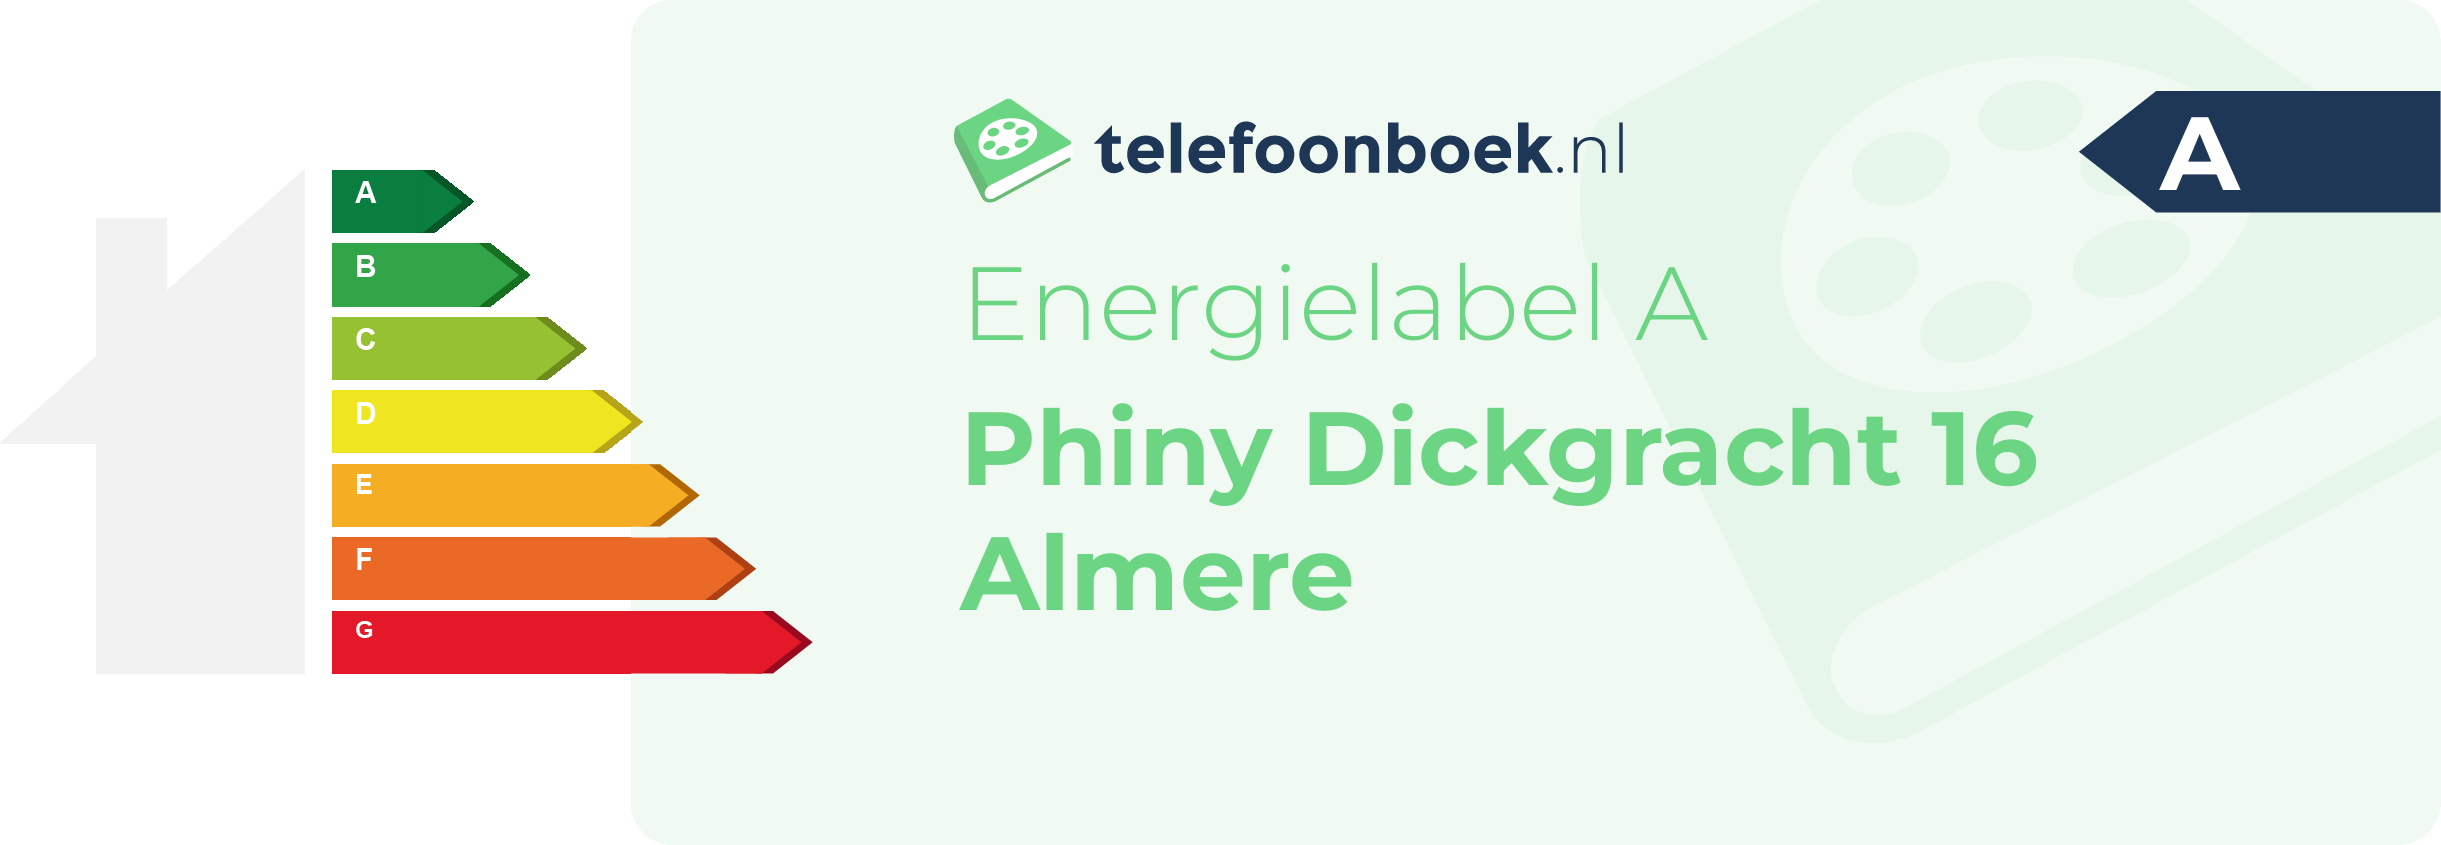 Energielabel Phiny Dickgracht 16 Almere